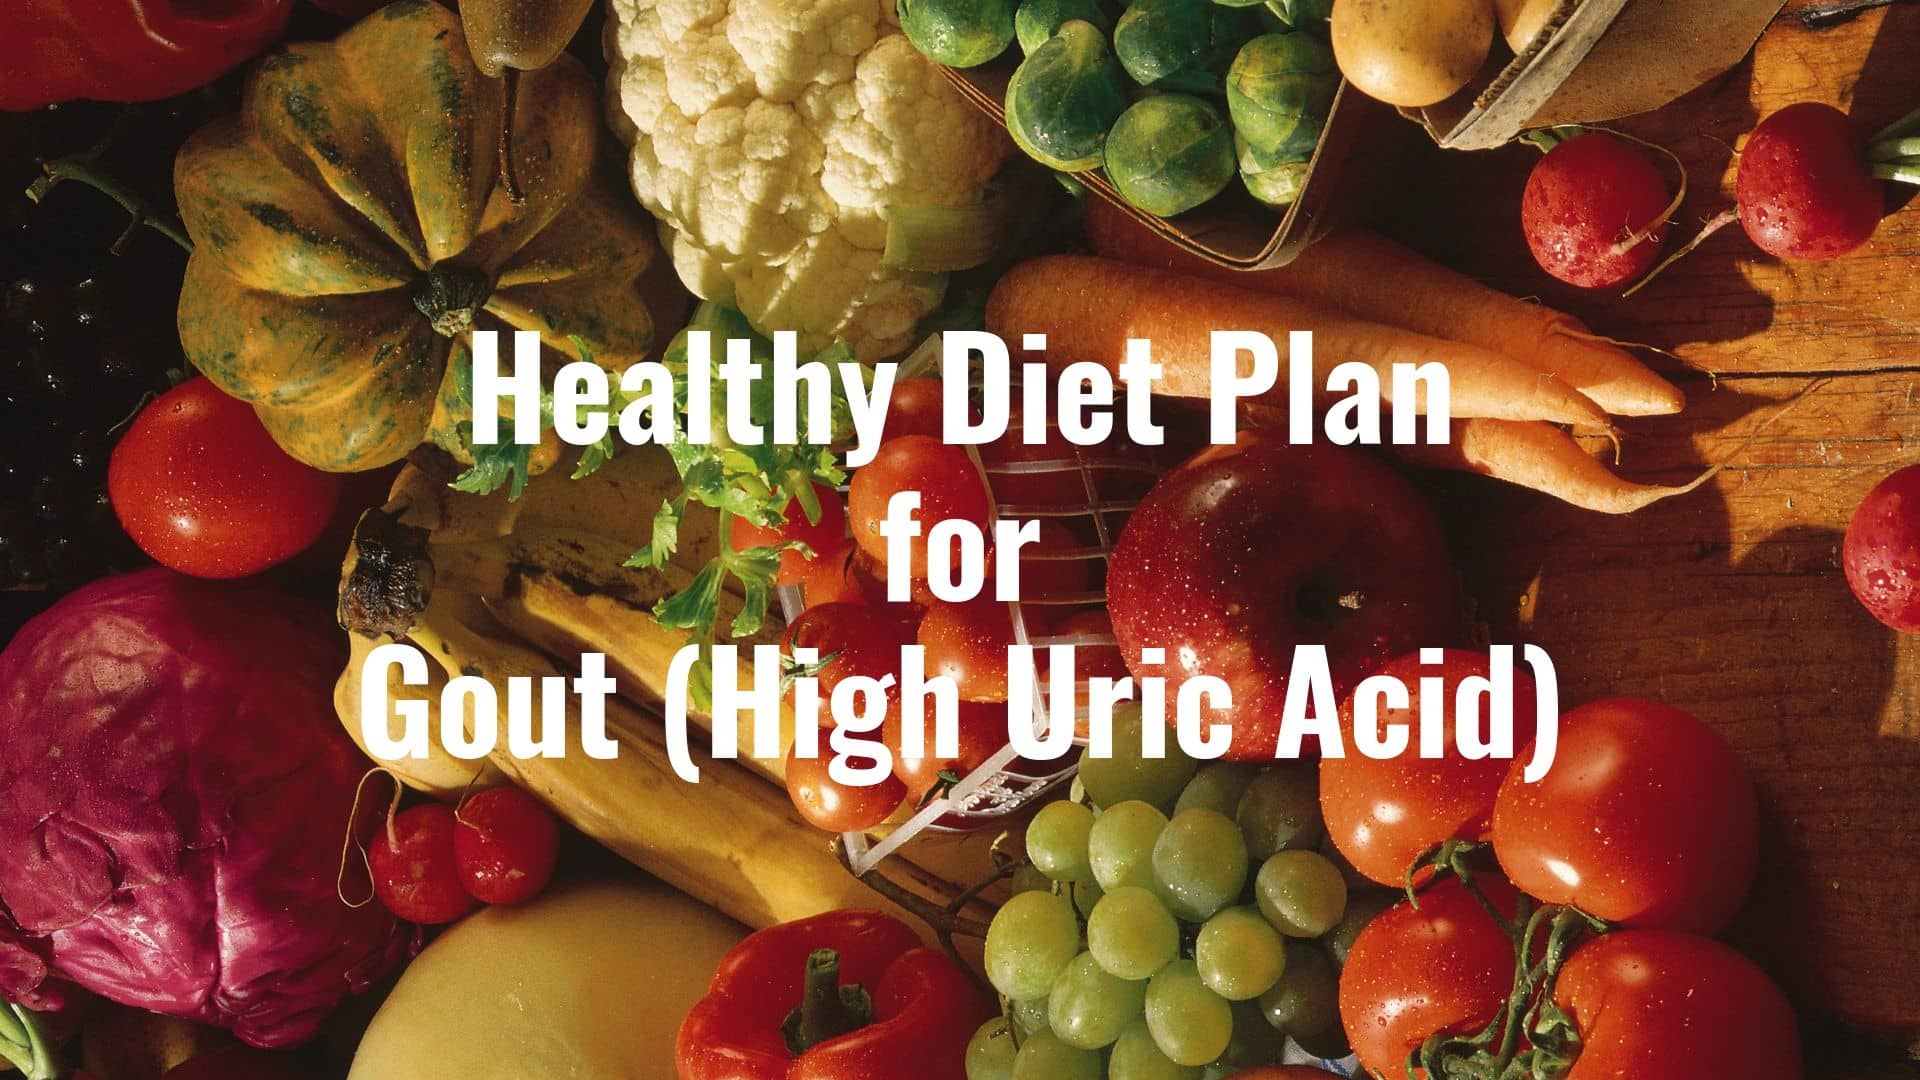 Healthy Diet Plan for Gout (High Uric Acid)